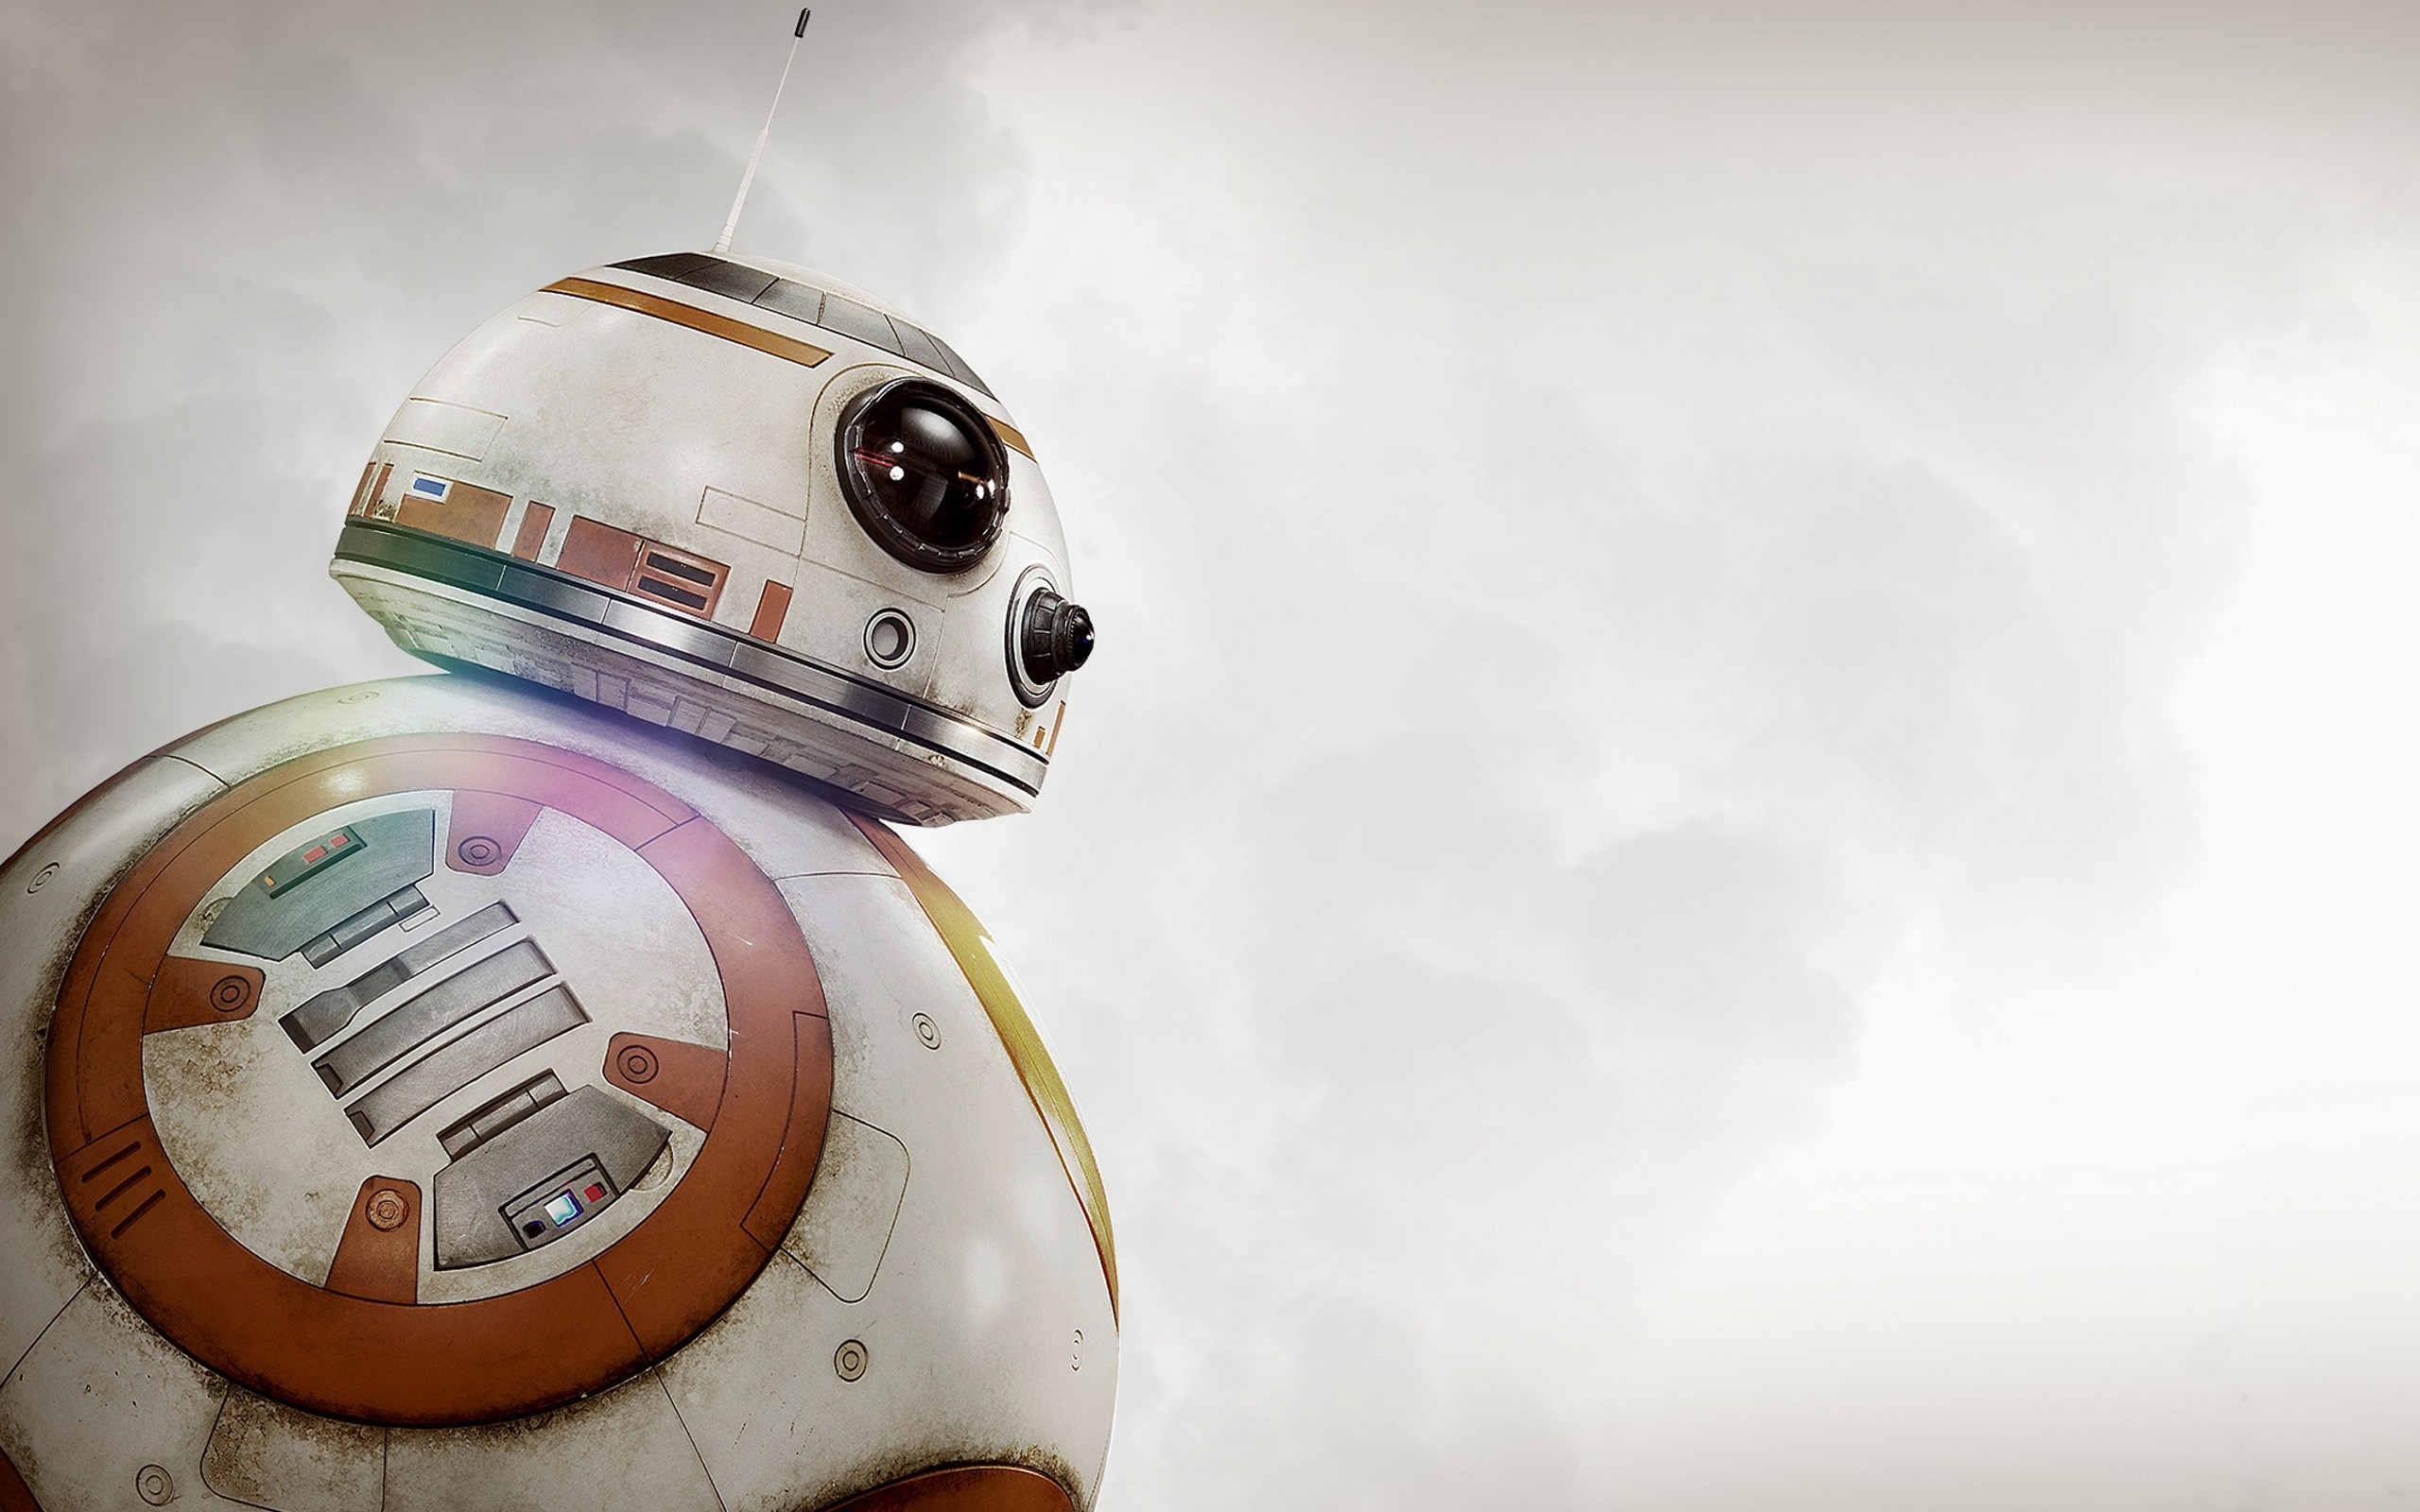 Star Wars The Force Awakens Robot Science Fiction BB 8 Star Wars Droids Movies 2560x1600